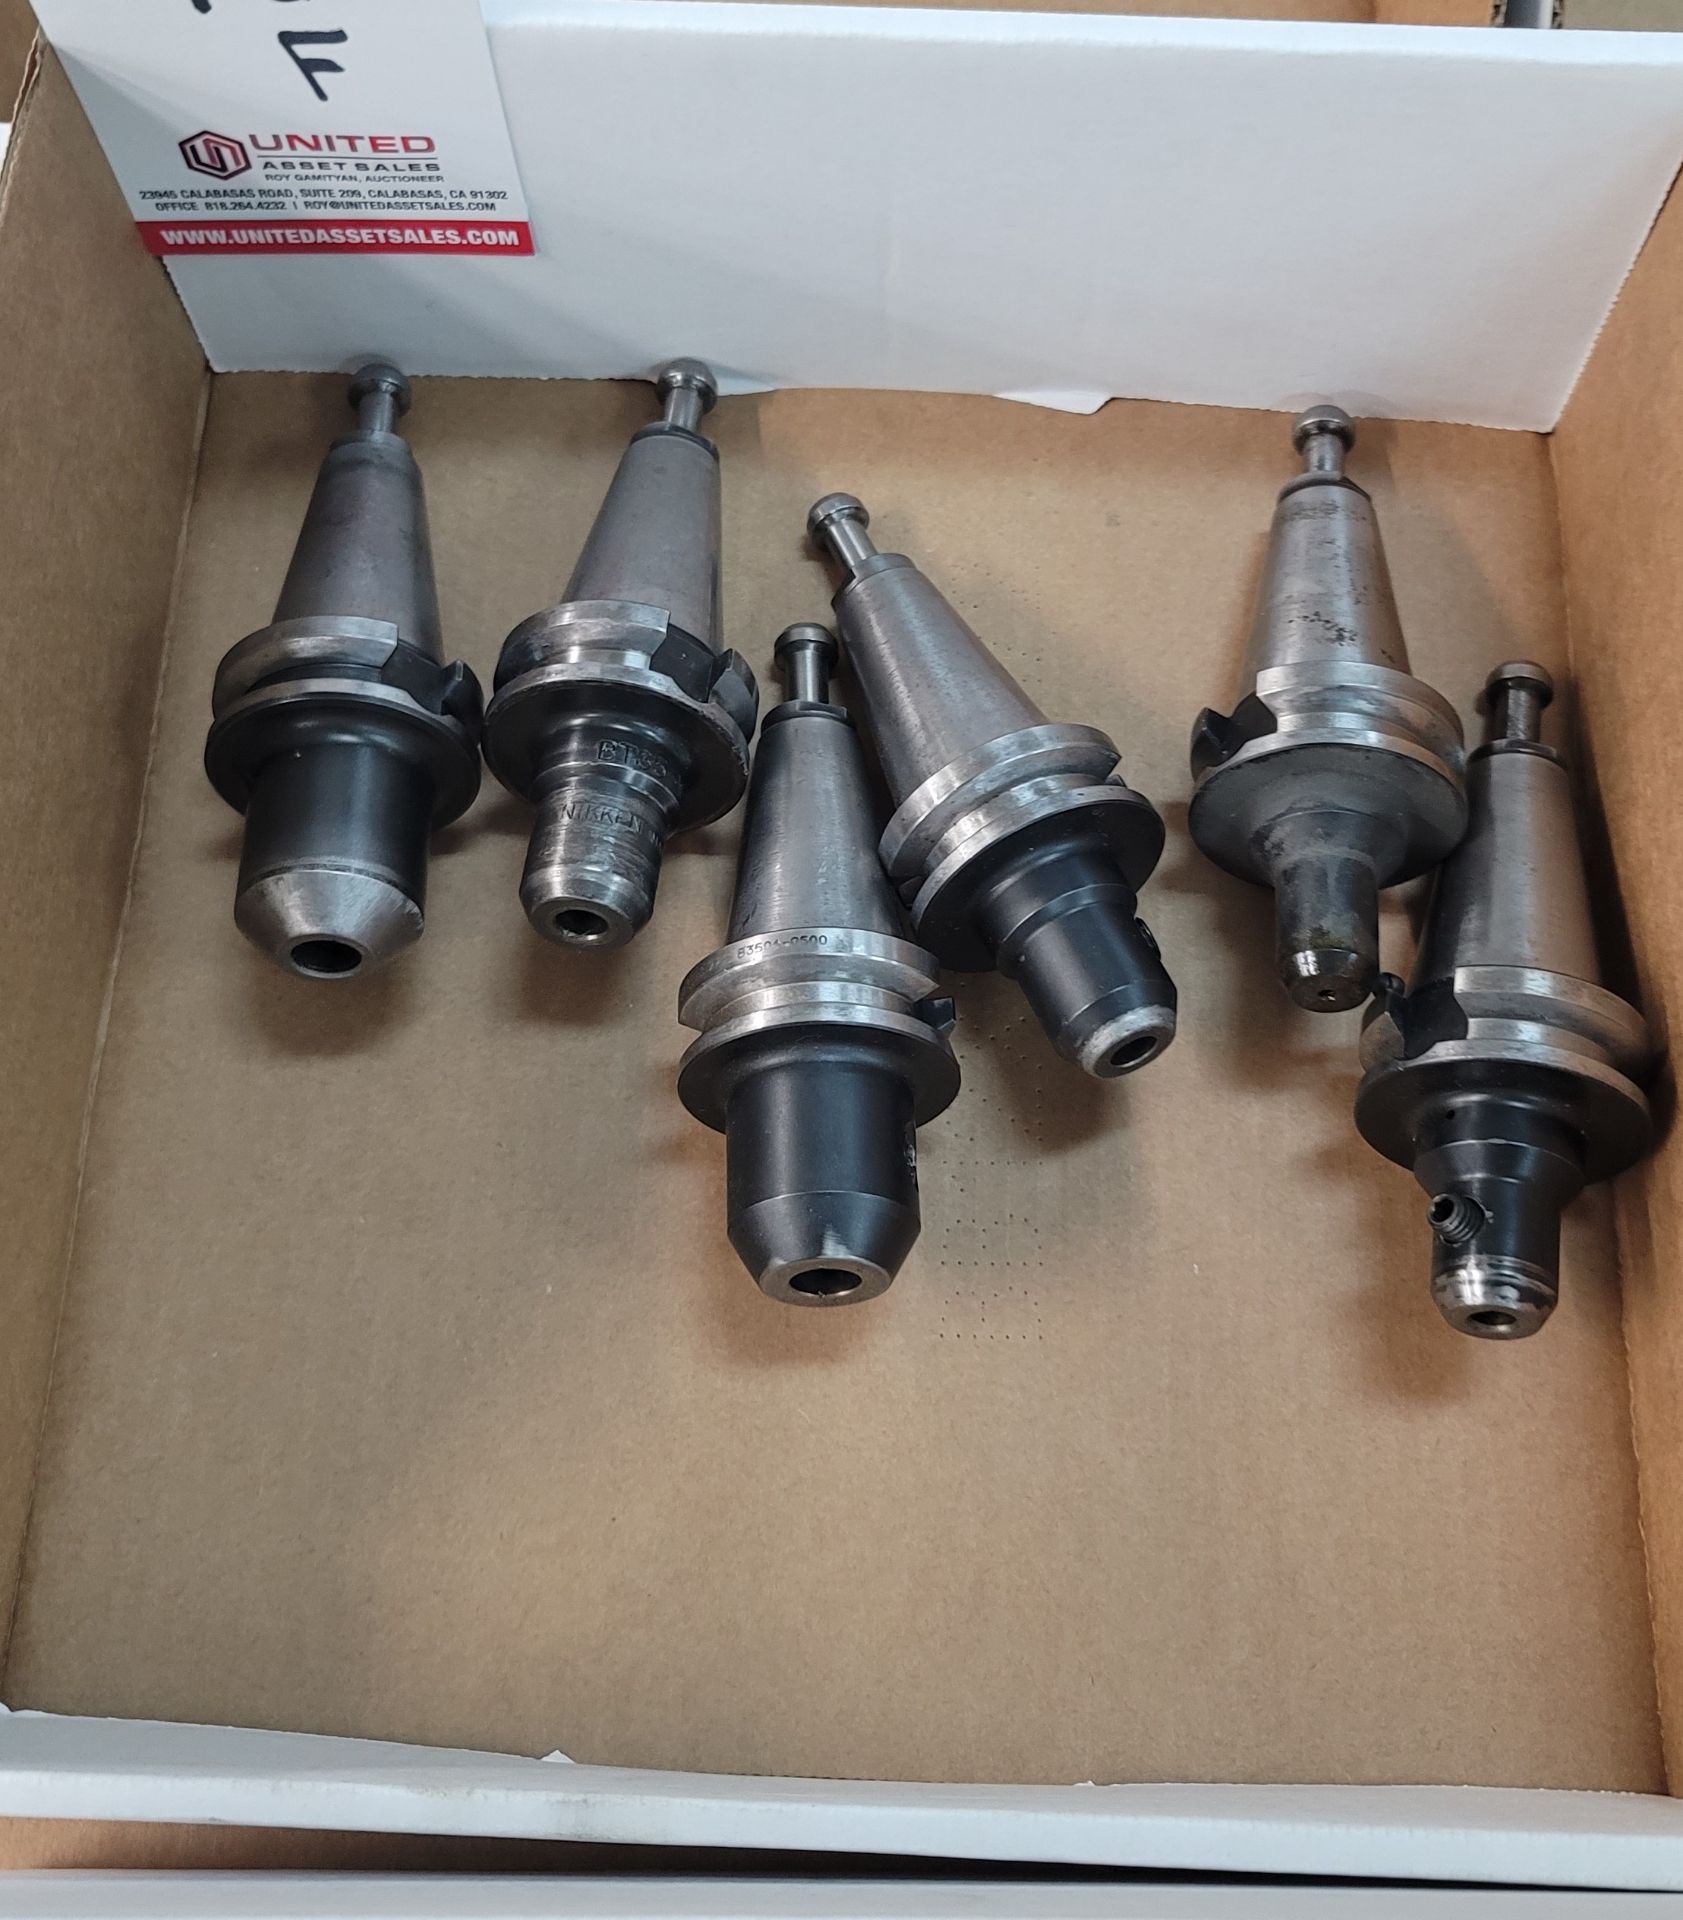 LOT - (6) BT-35 TOOL HOLDERS, 1/8" SOLID, **IMMEX REGISTERED EQUIPMENT (NEEDS TO RETURN TO THE US)